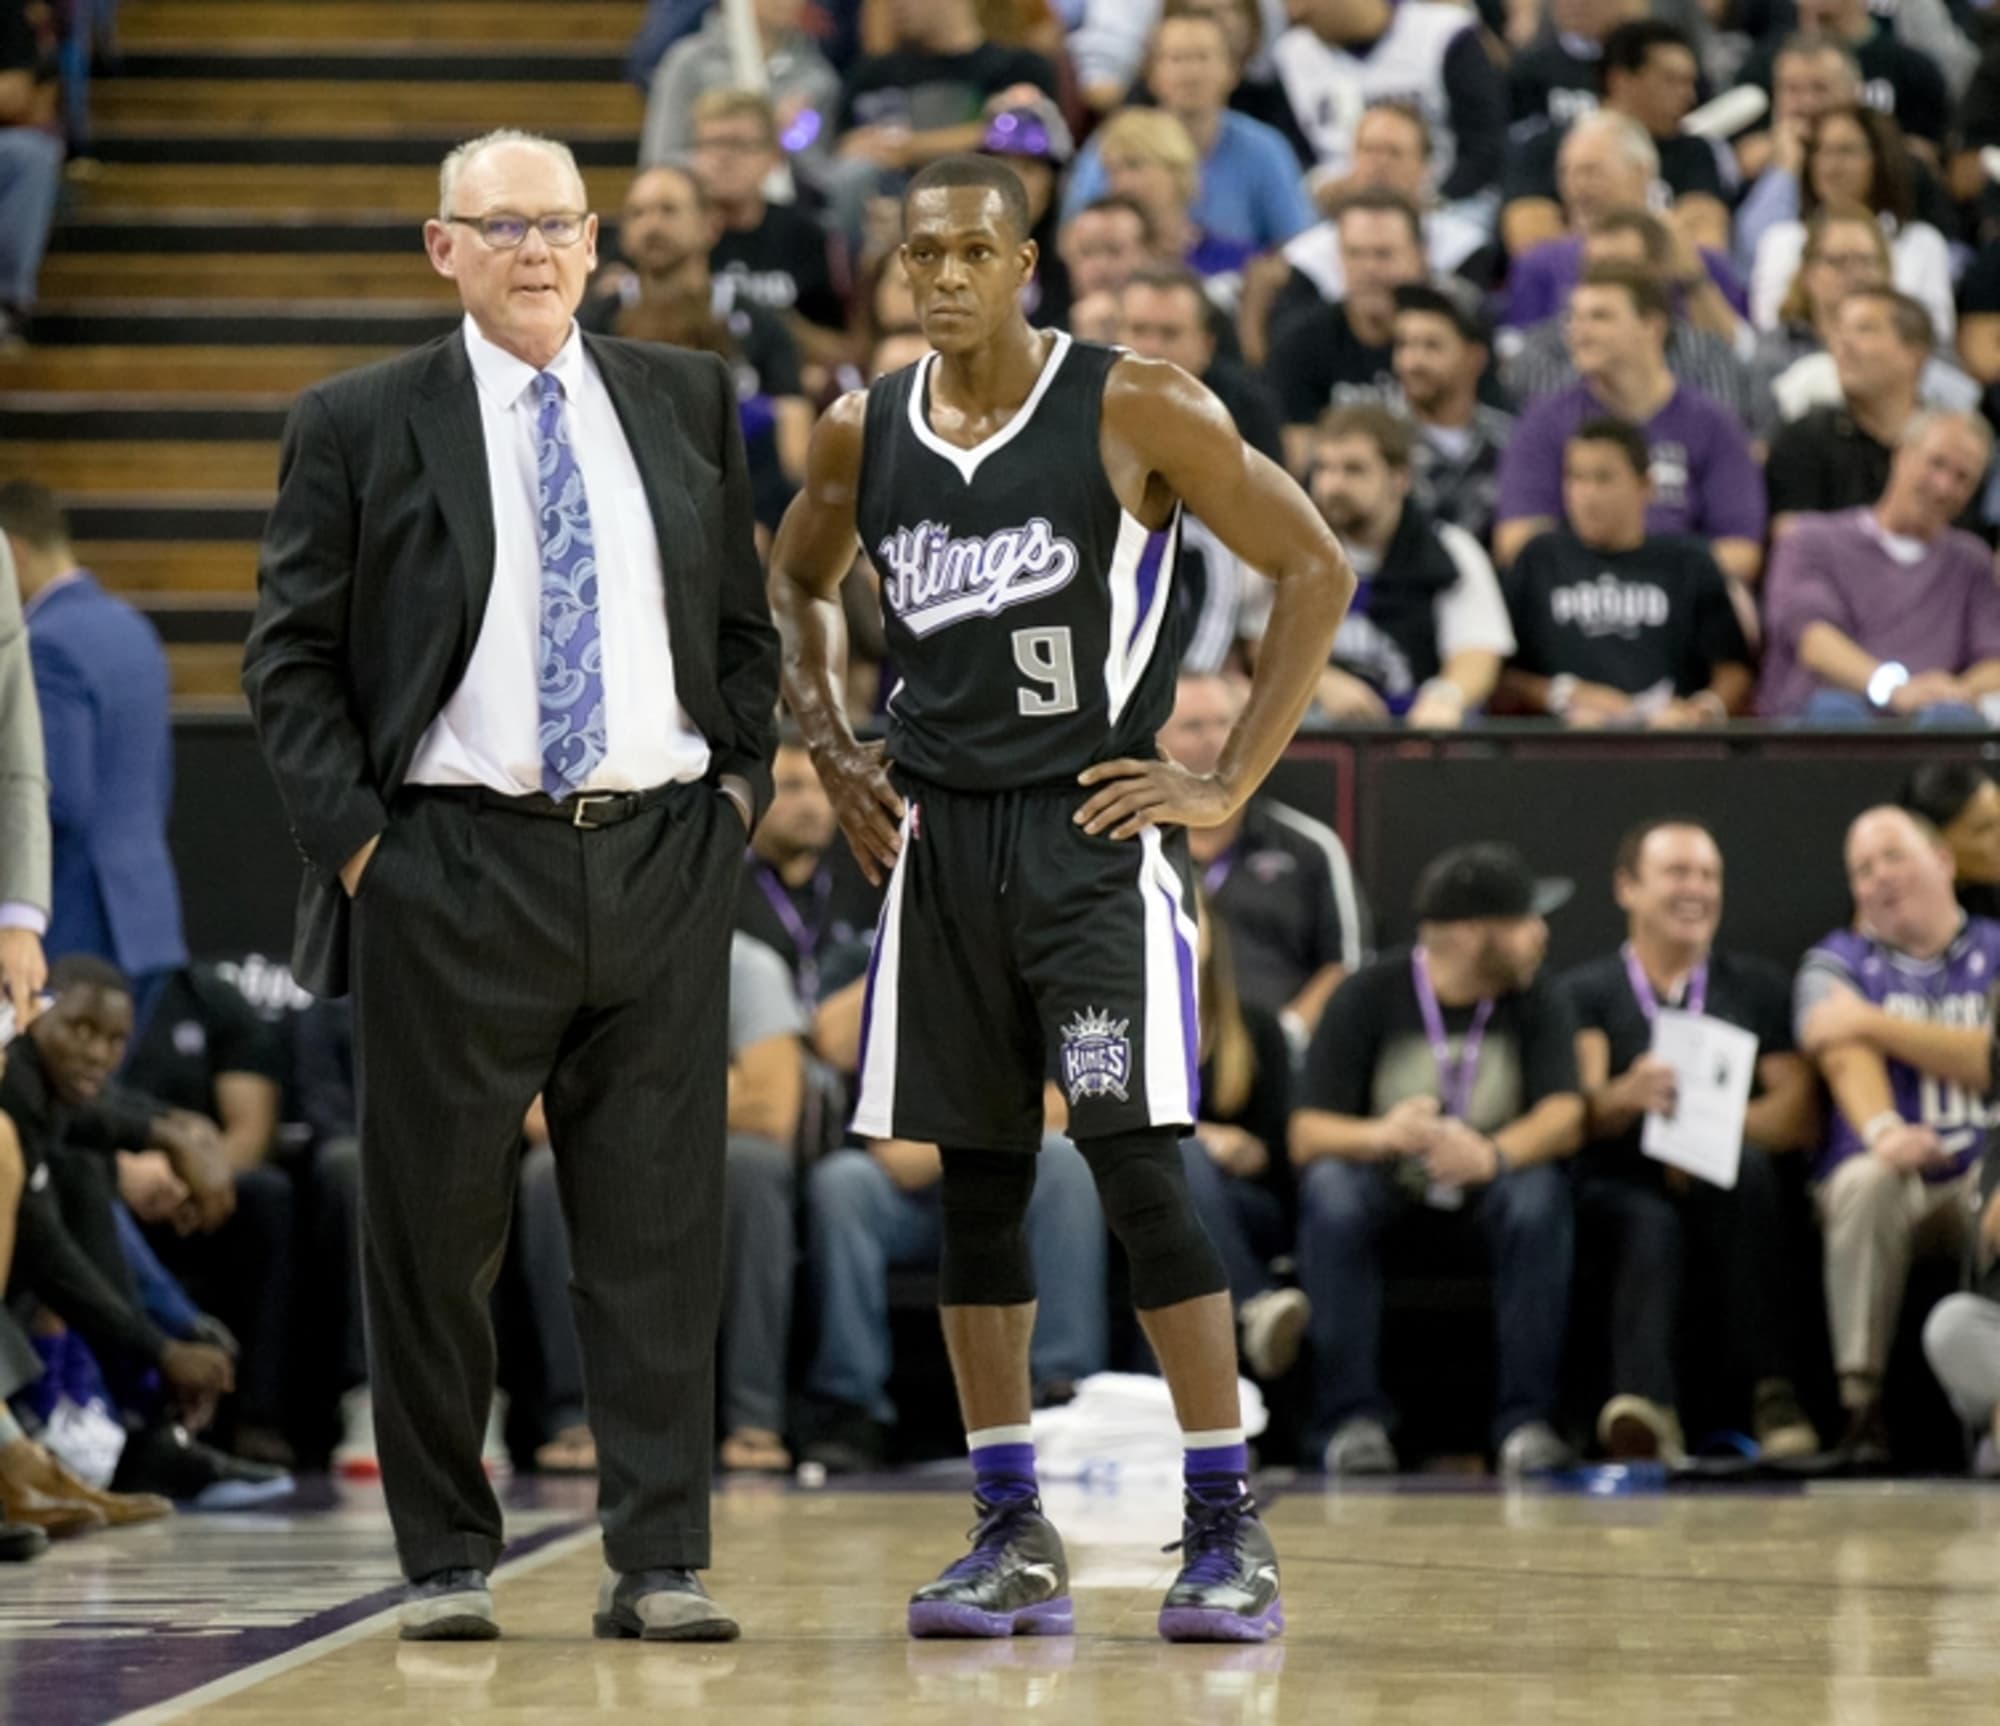 GM admits Kings turned down a 'better deal' before trading DeMarcus Cousins, Sacramento Kings